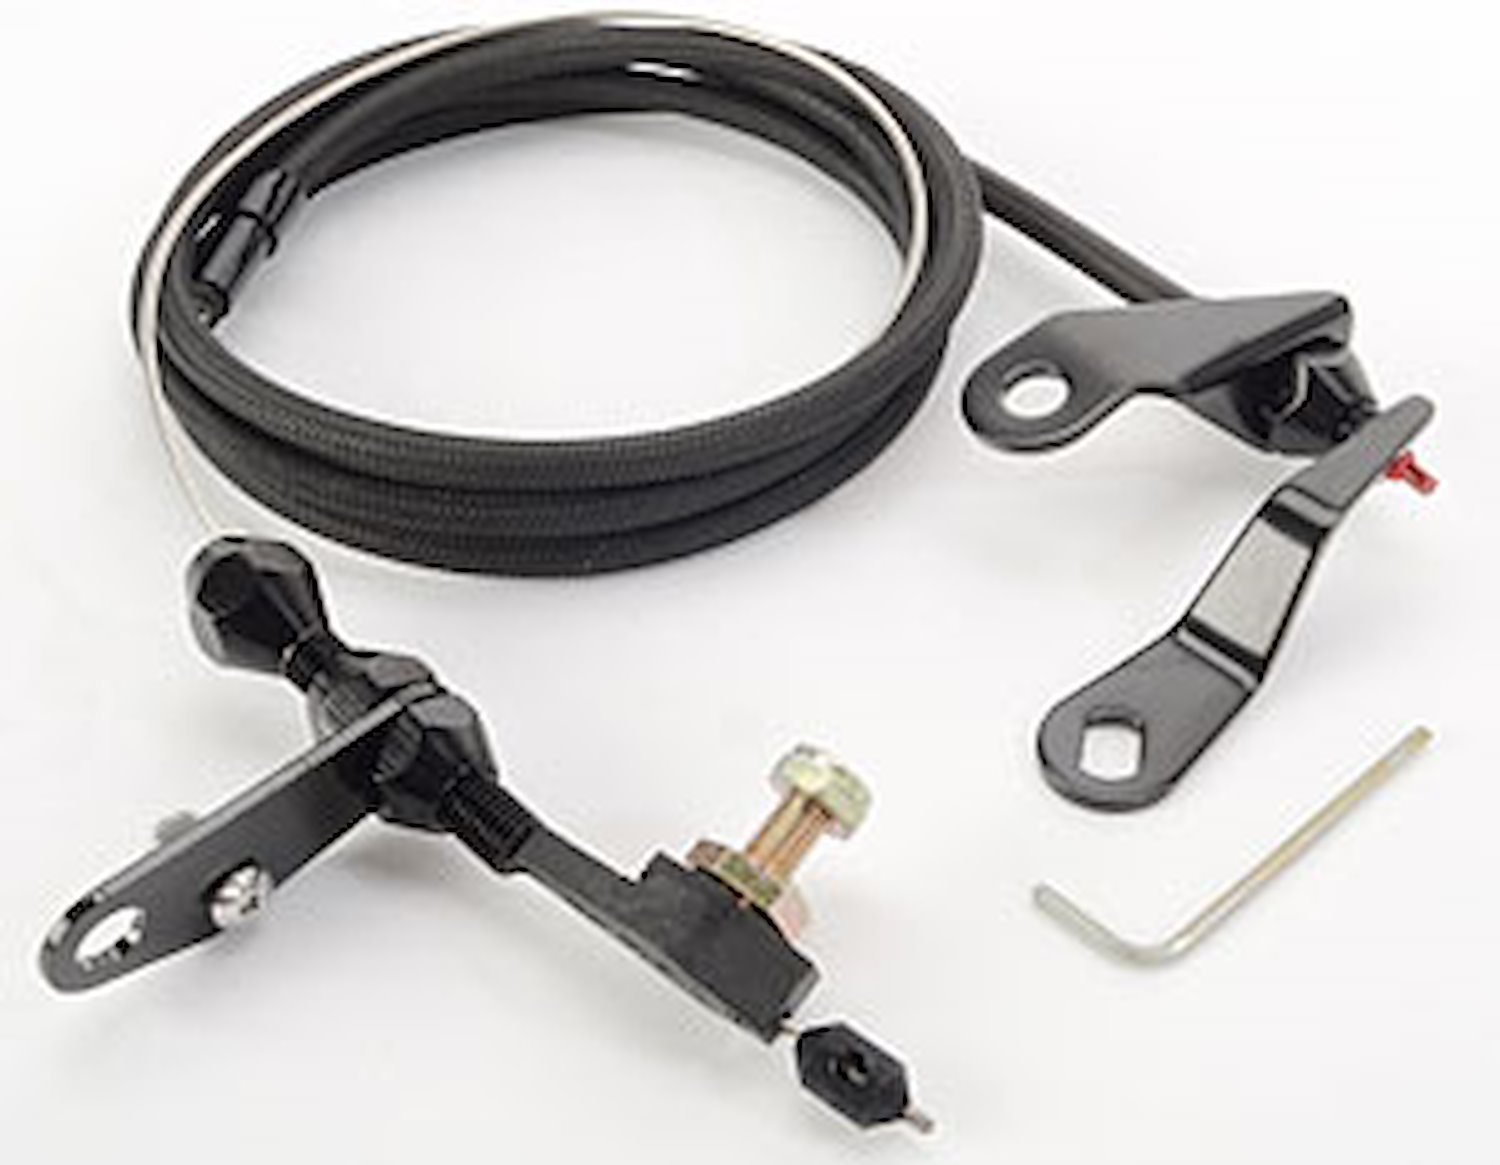 Ford C4 Transmission Kickdown Cable Kit Black Anodized Aluminum Fittings and Ferrule